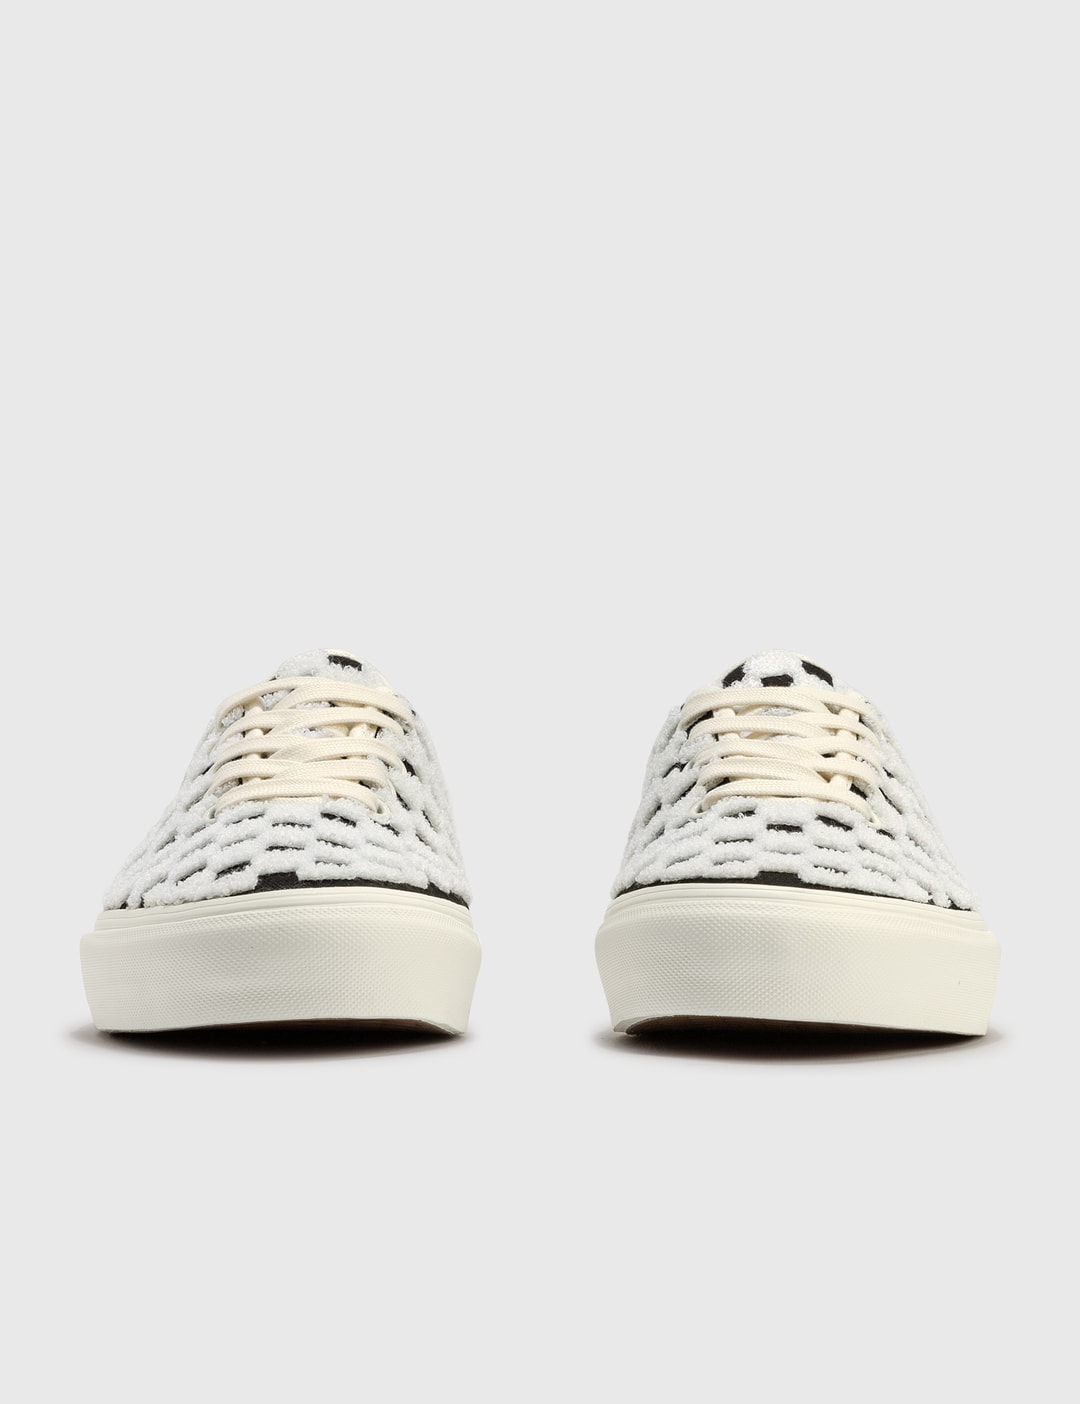 grænseflade område Surichinmoi Vans - Authentic One Piece VLT LX | HBX - Globally Curated Fashion and  Lifestyle by Hypebeast